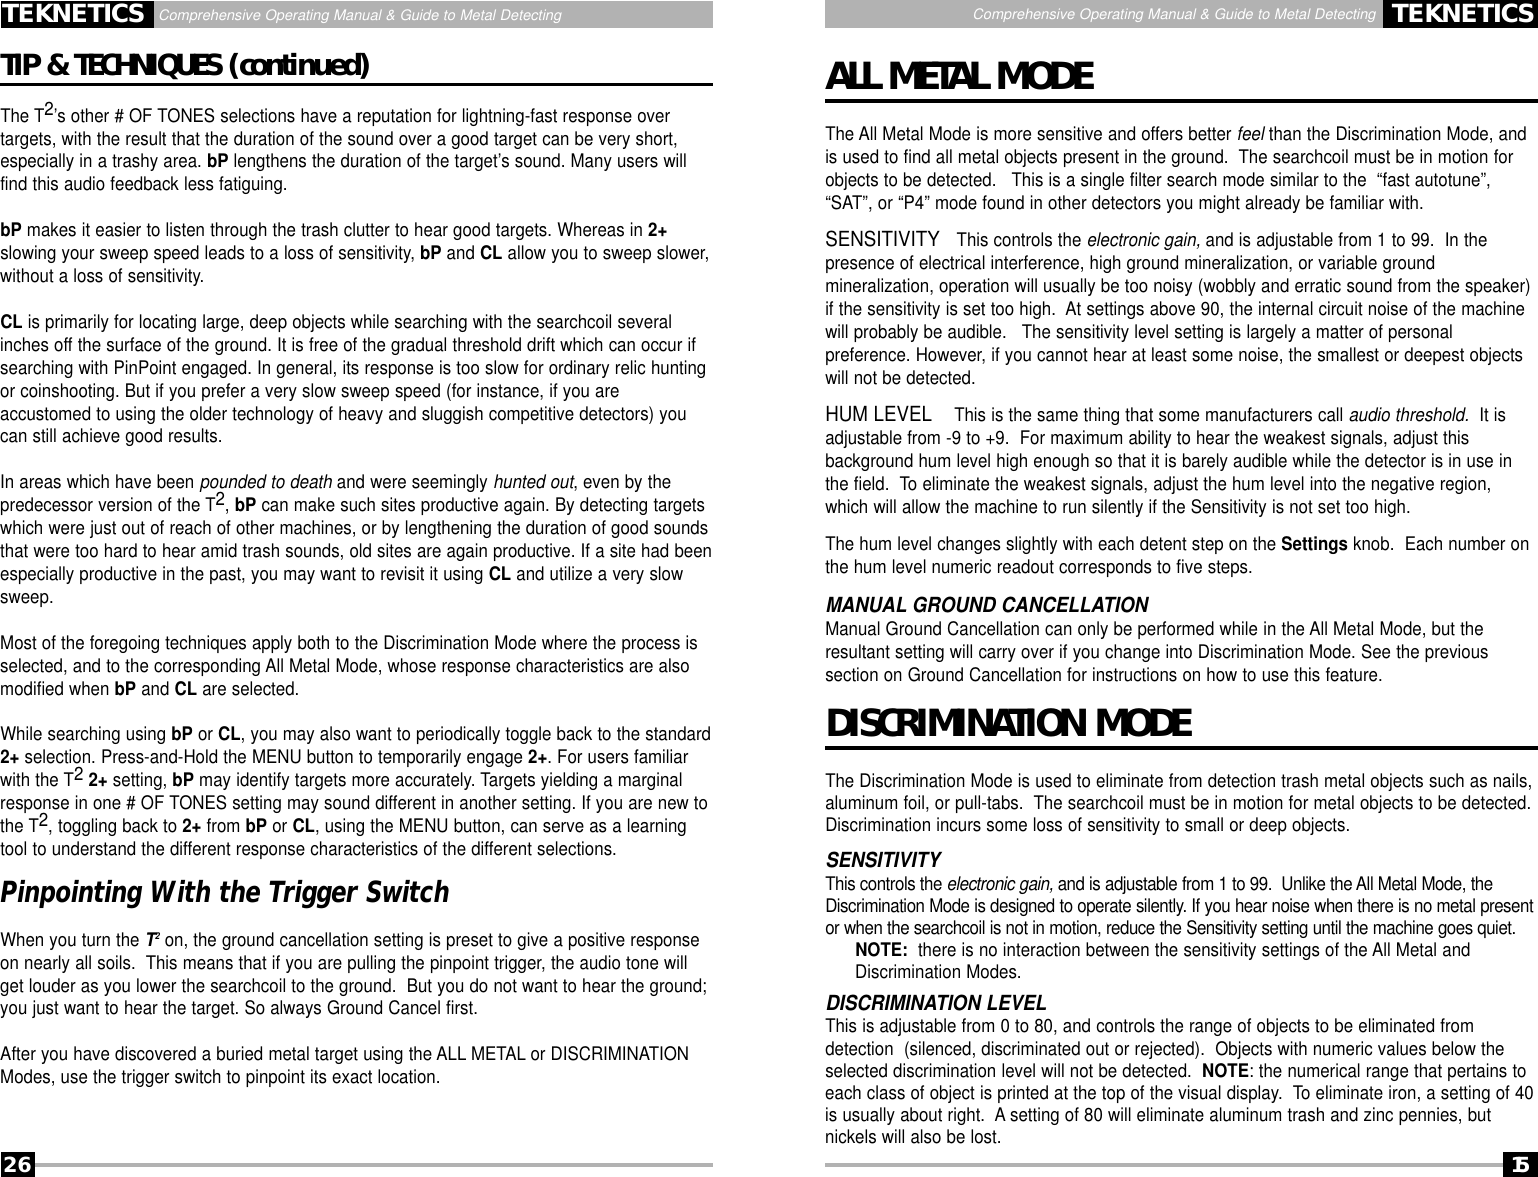 Page 26 of First Texas T2MD Professional Metal Detector User Manual Layout 1